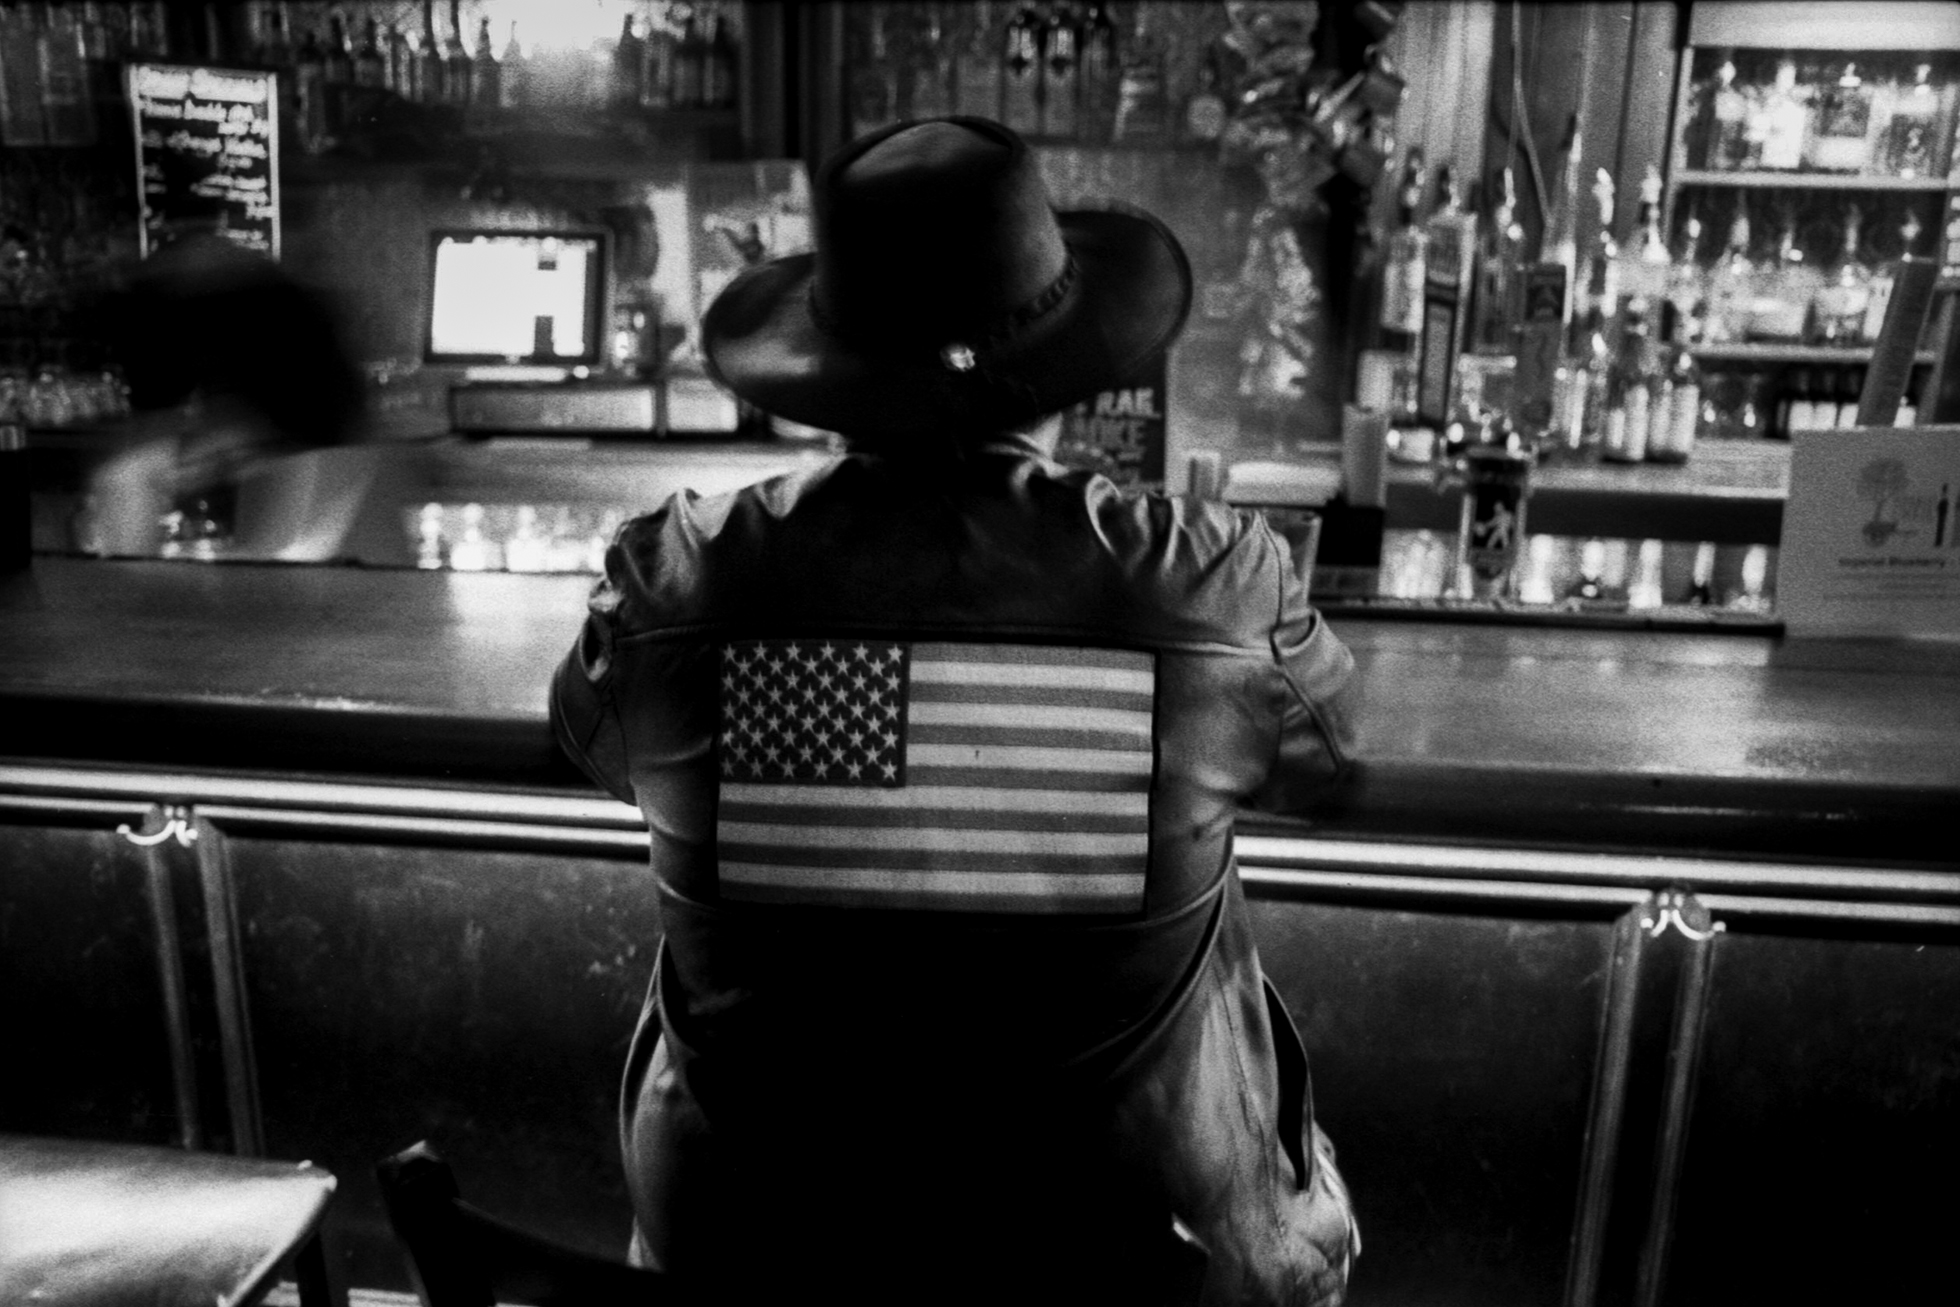 A person is sitting at a bar wearing a leather jacket with the American flag across the back and a Western-like hat.